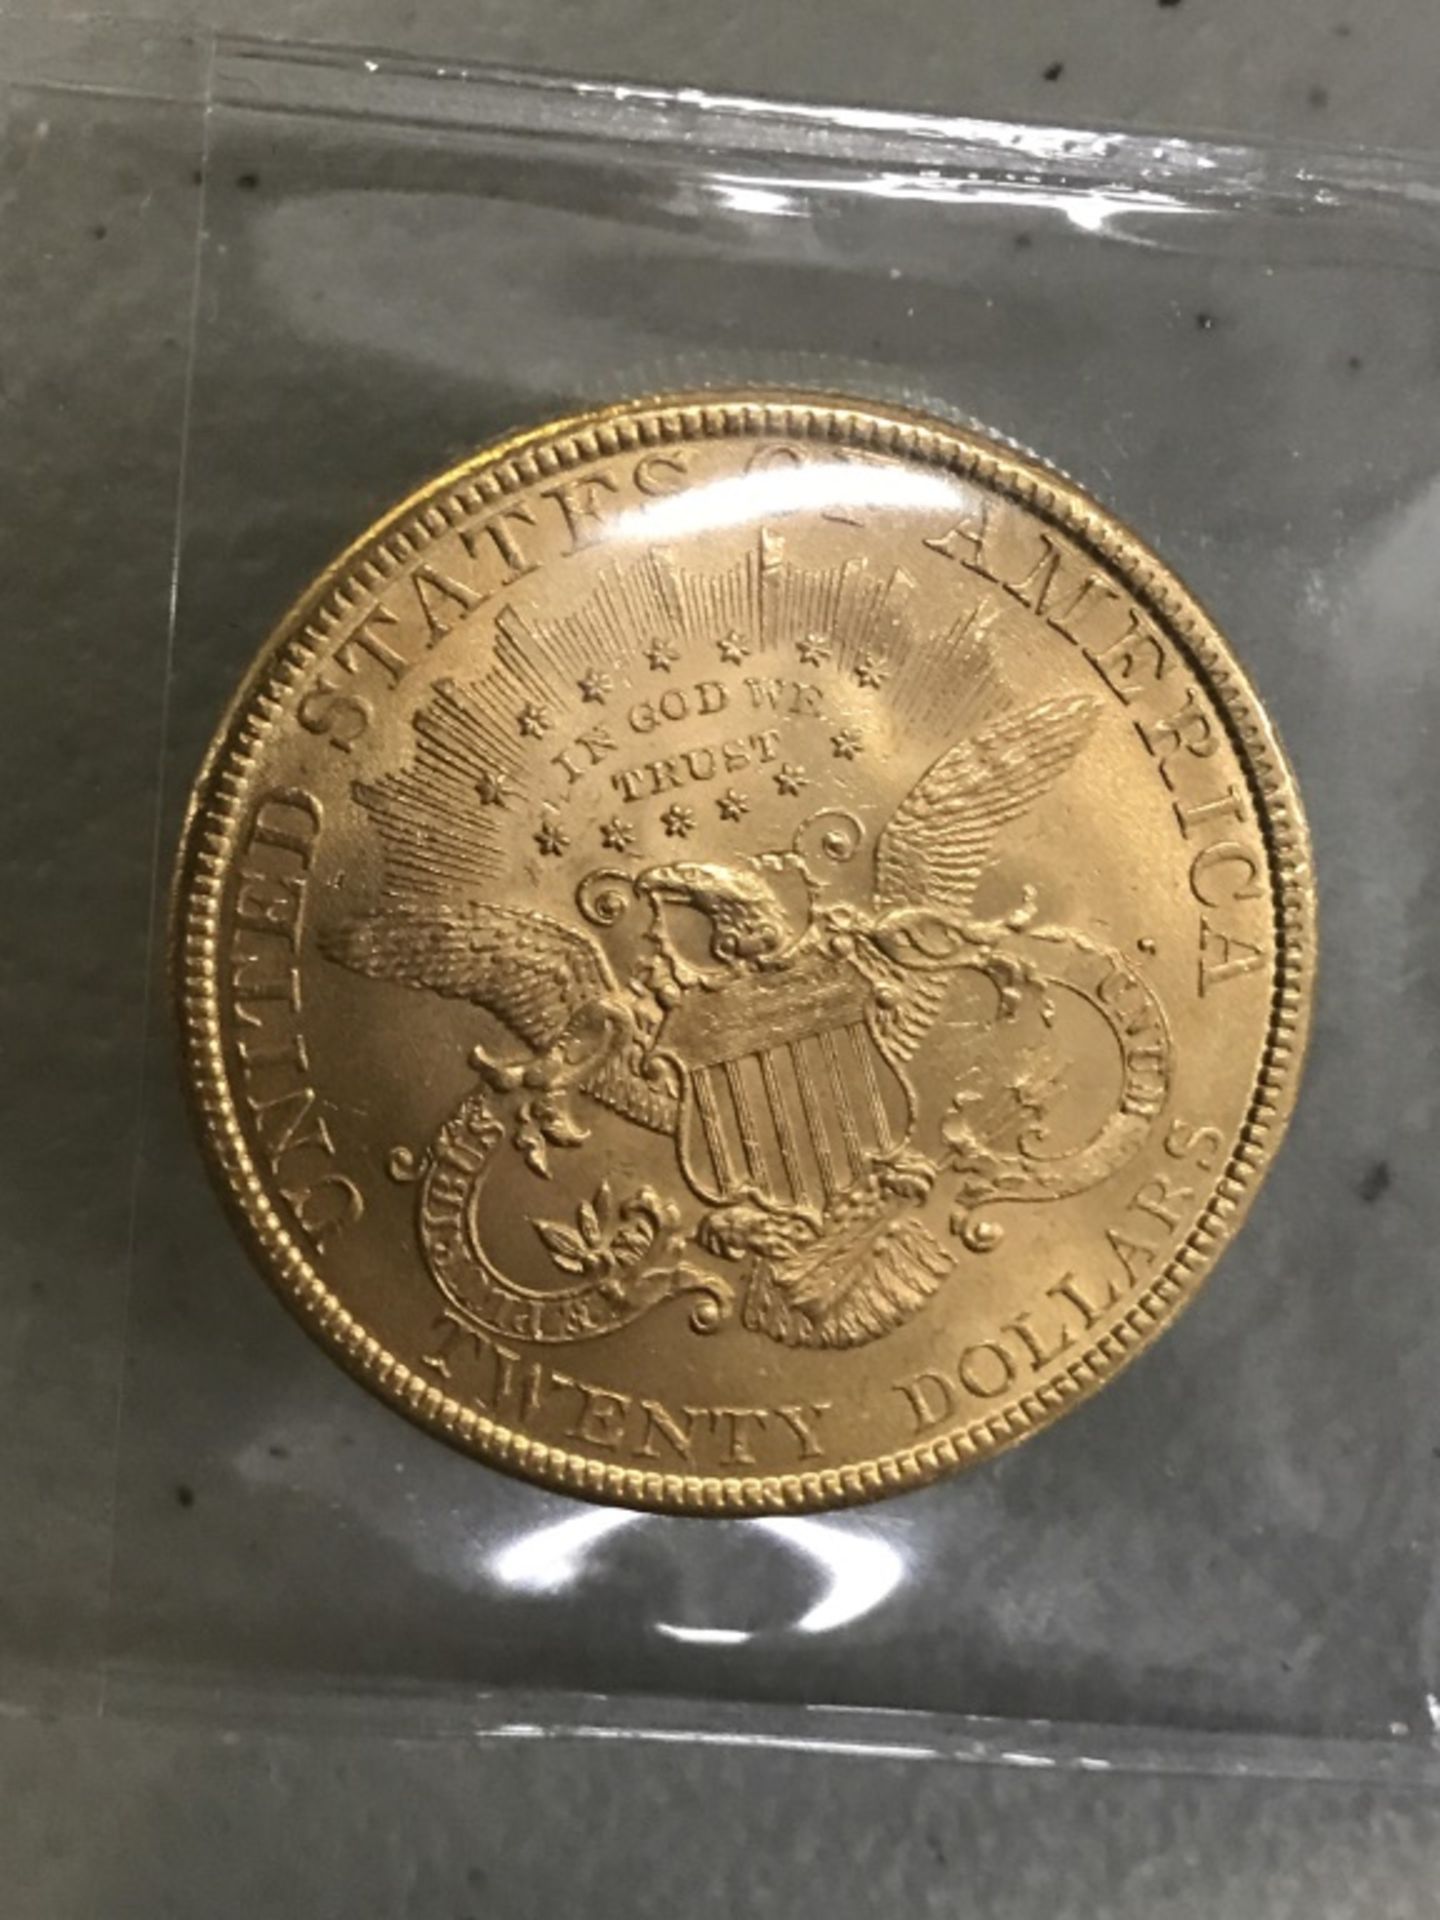 $20 US Gold 1895 Coin - Image 7 of 9